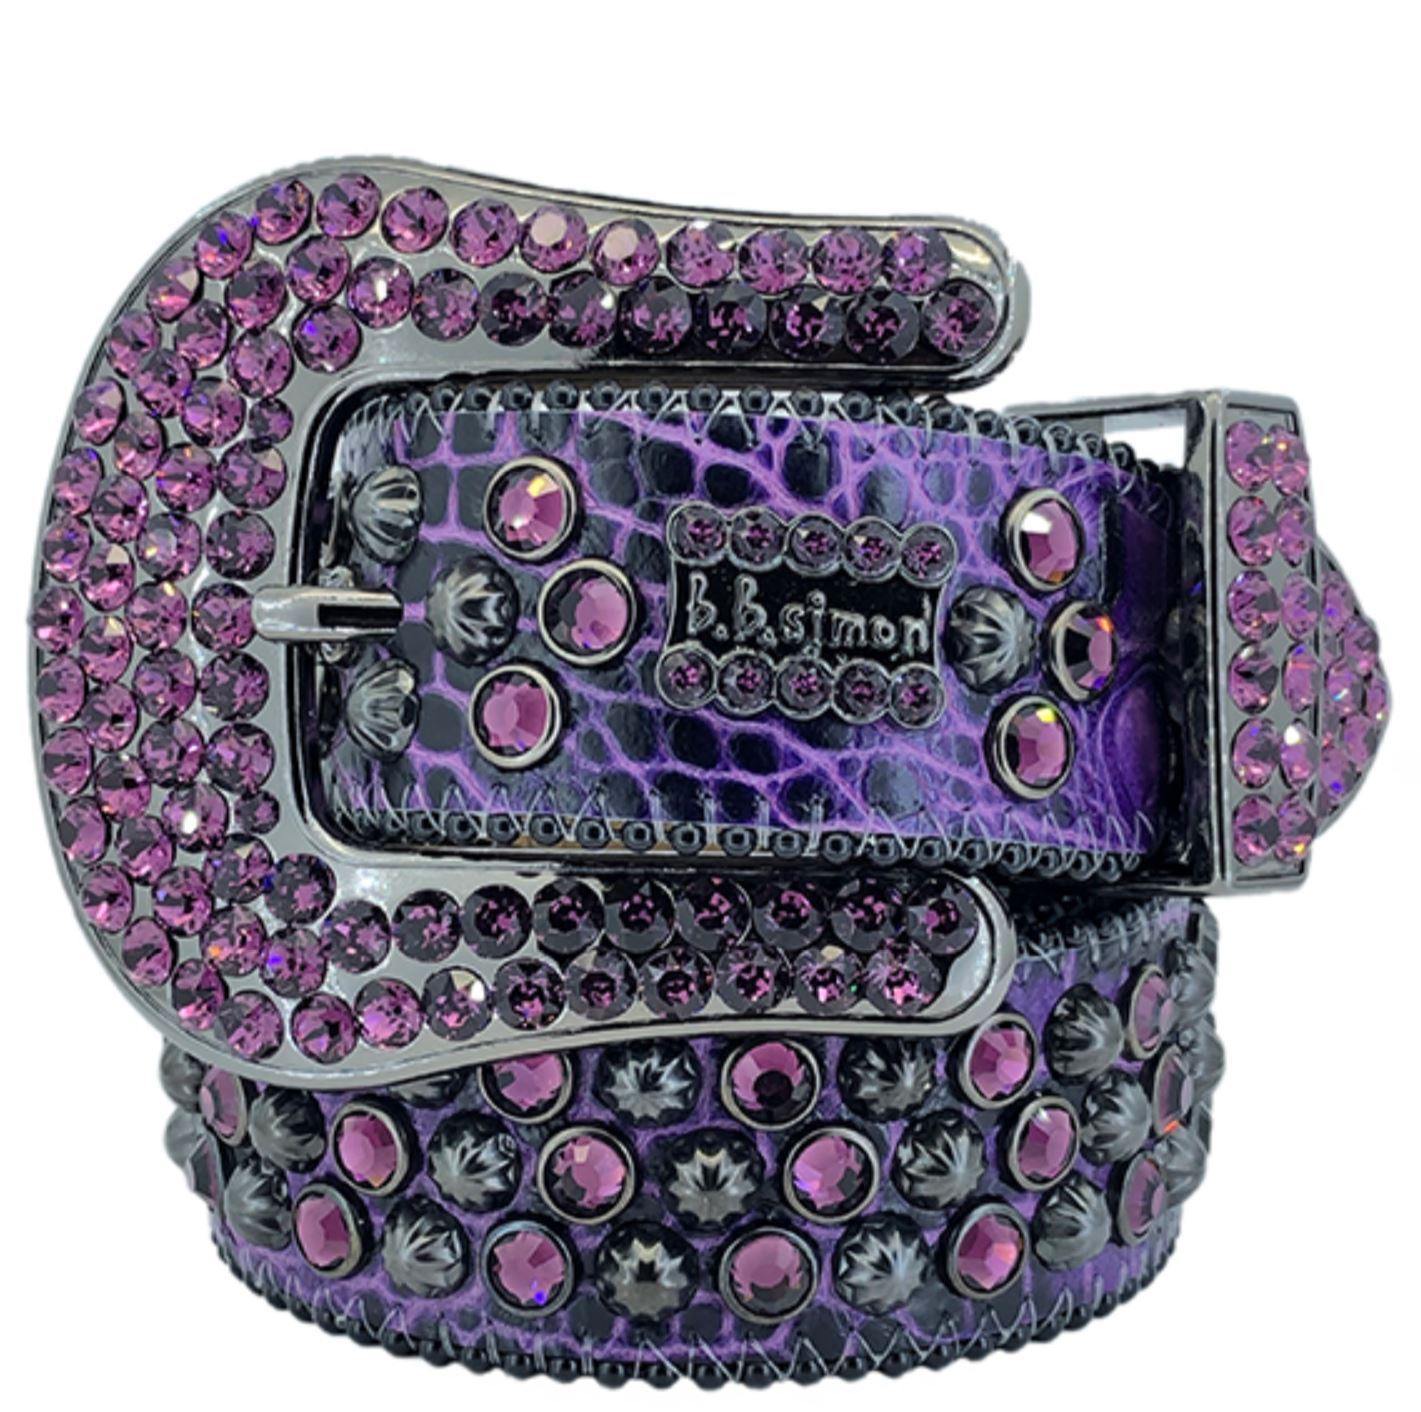 BB Simon Purple Leather with Crystals Belt - Amore Accessories